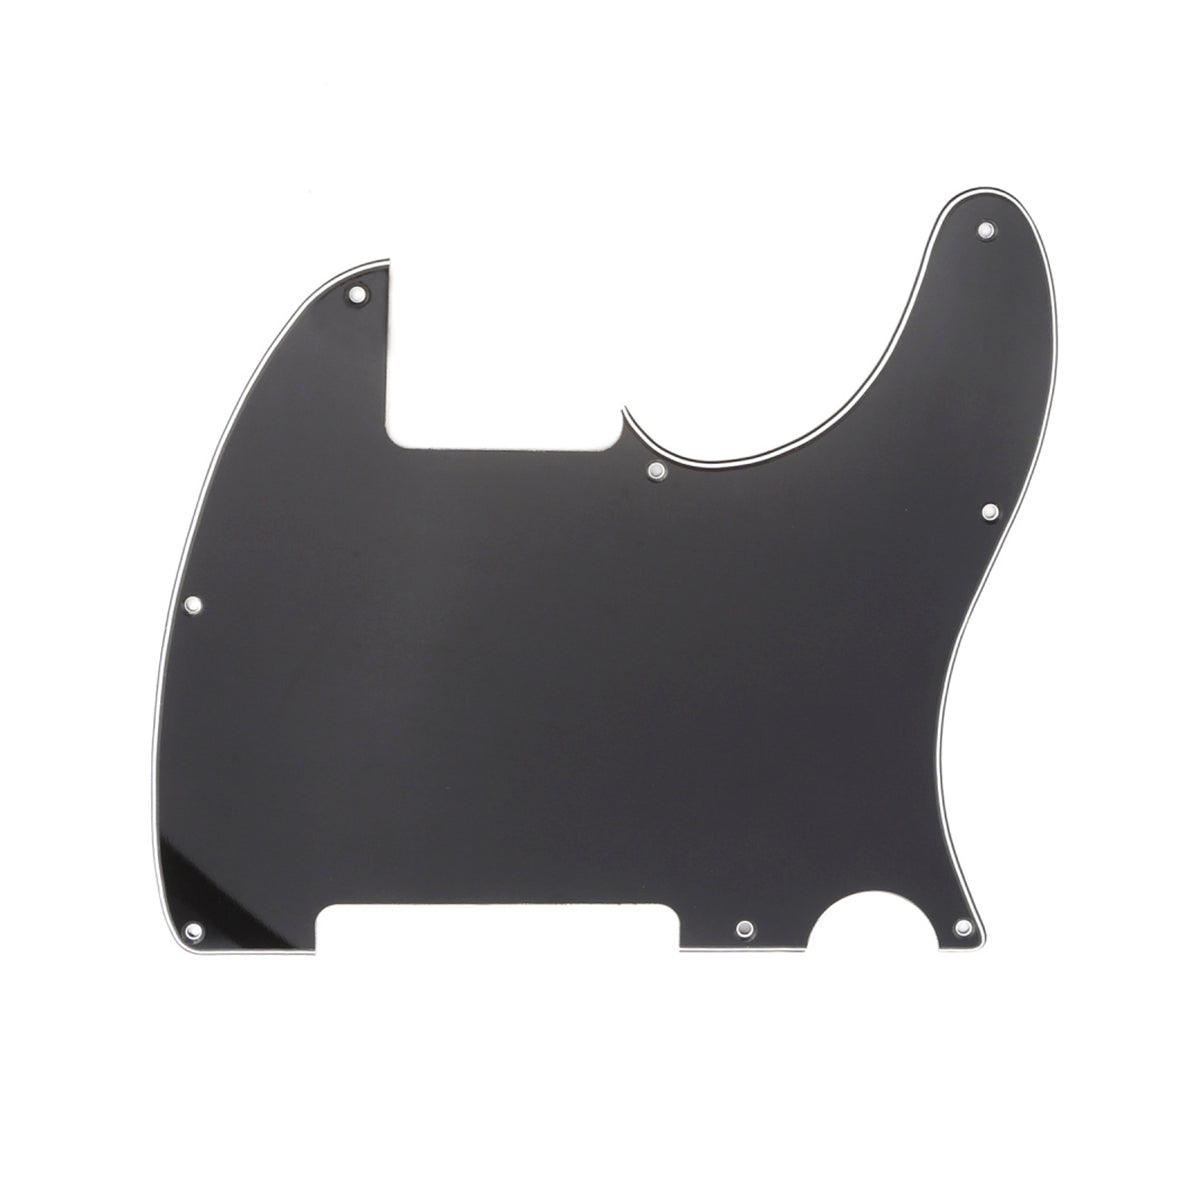 Musiclily 8 Hole Tele Pickguard Blank for Fender USA/Mexican Telecaster Esquire Guitar, 3Ply Black